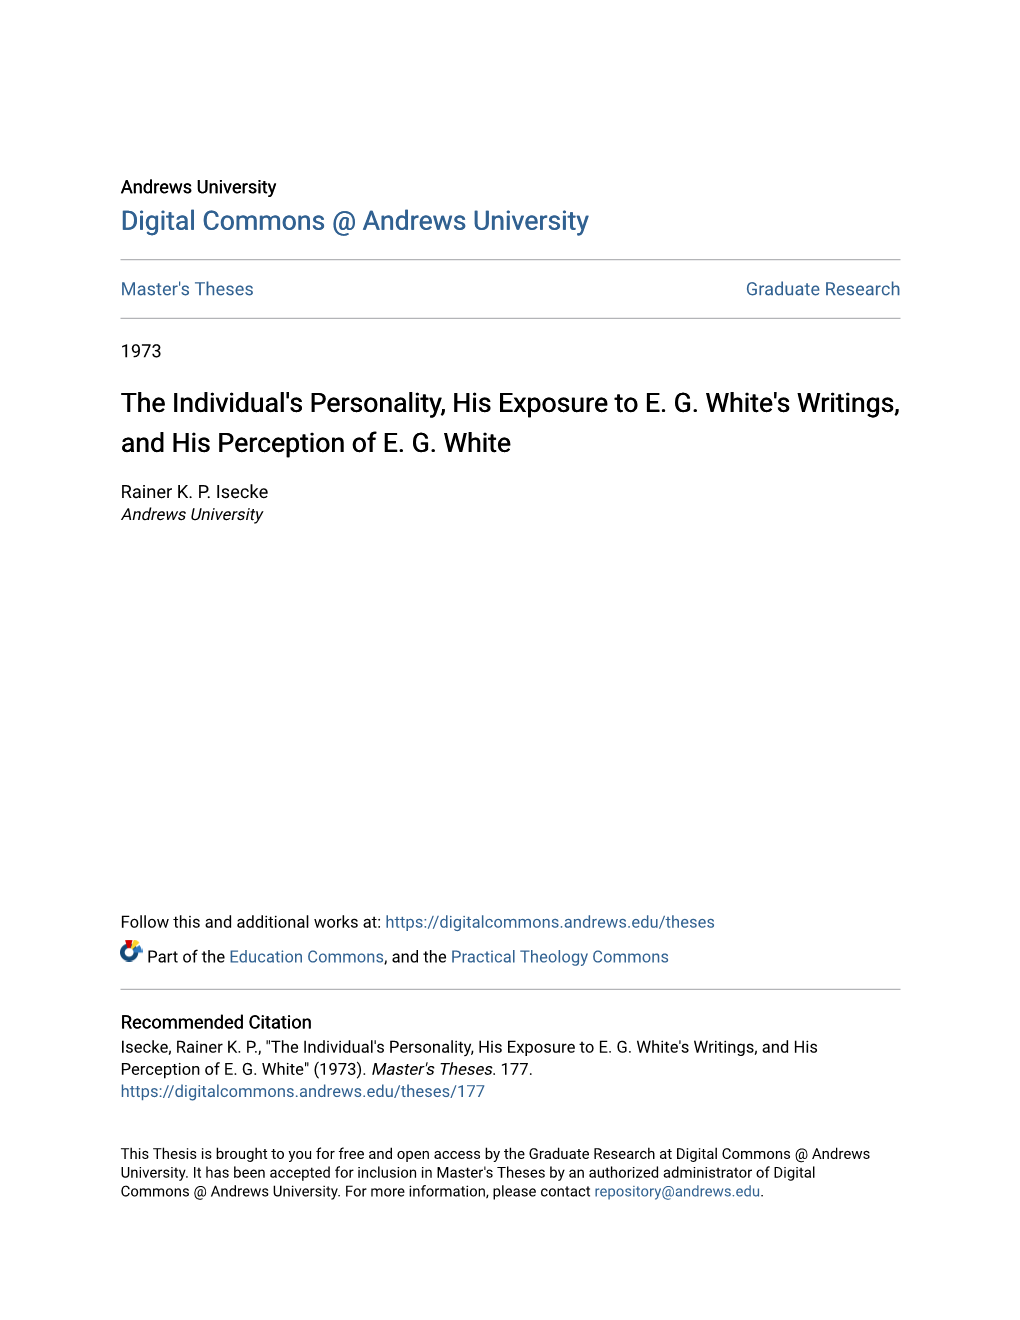 The Individual's Personality, His Exposure to E. G. White's Writings, and His Perception of E